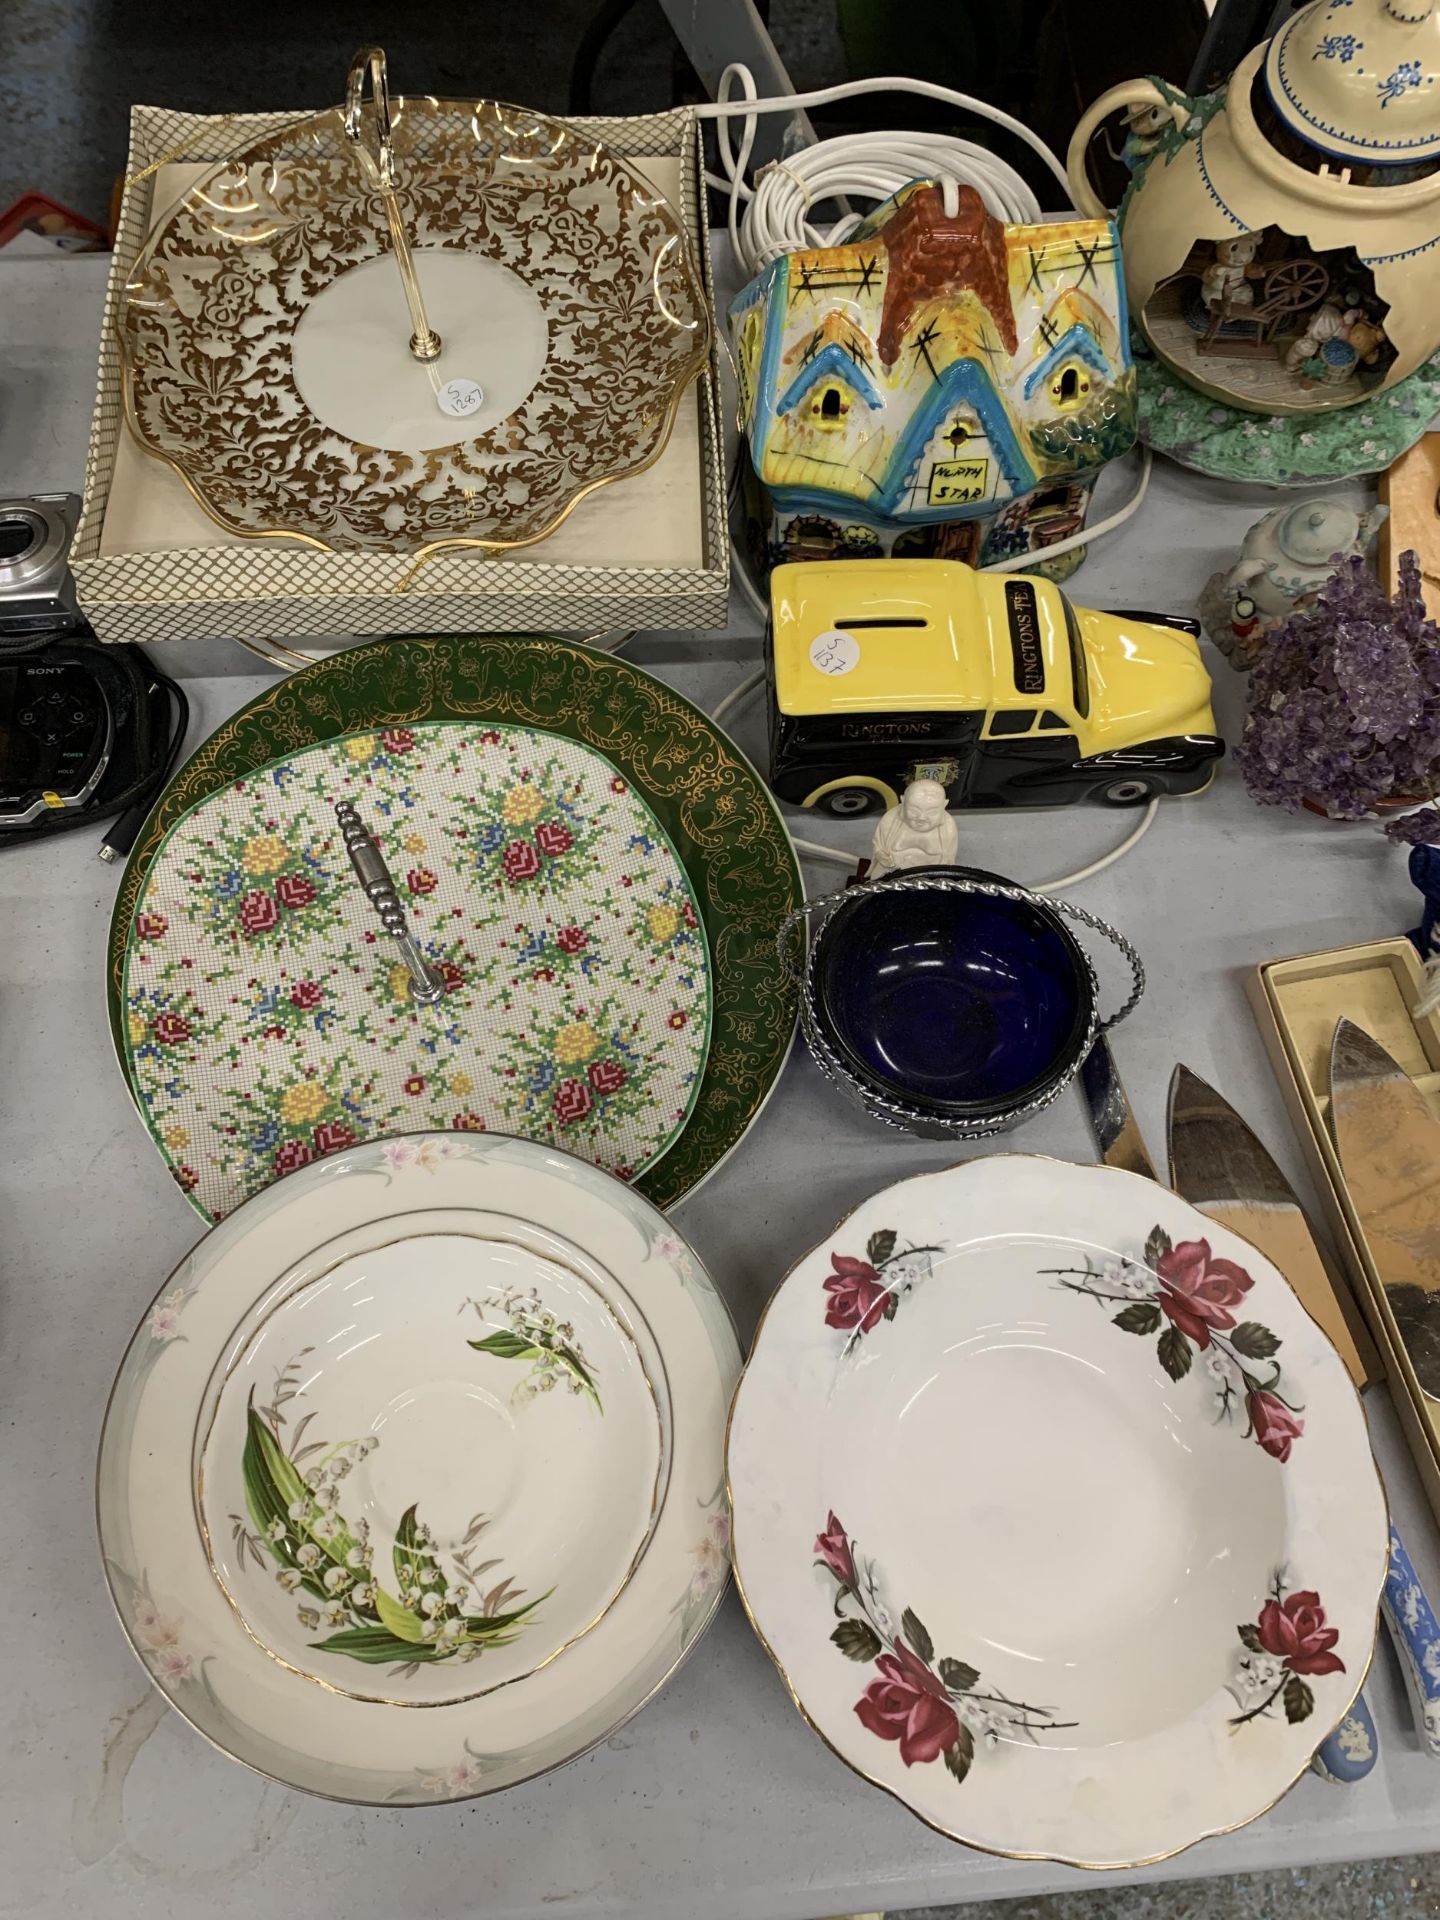 A LARGE MIXED VINTAGE LOT TO INCLUDE CAKE STANDS, A NOVELTY TEAPOT AND LAMP, WEDGWOOD AND SPODE - Image 3 of 3